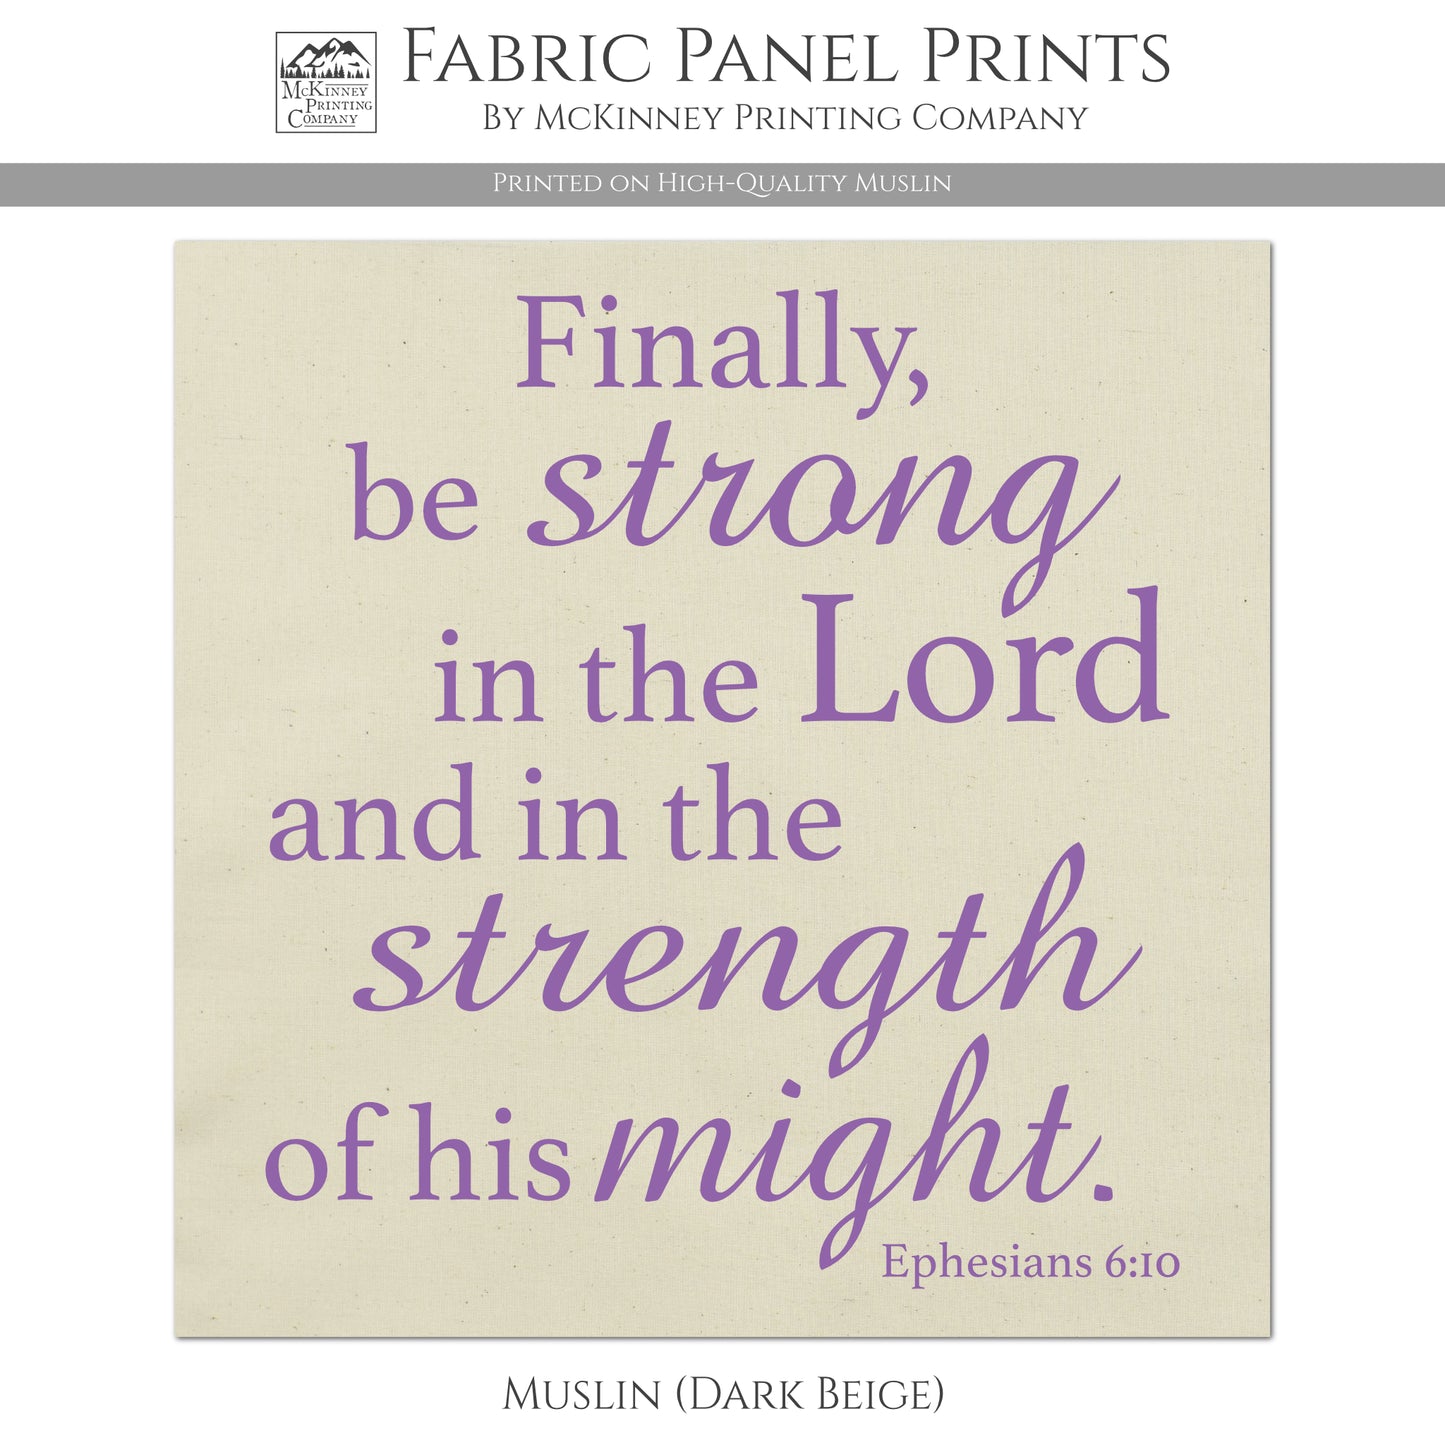 Finally be strong in the Lord and in the strength of his might - Ephesians 6:10 - Fabric Panel Print - Muslin